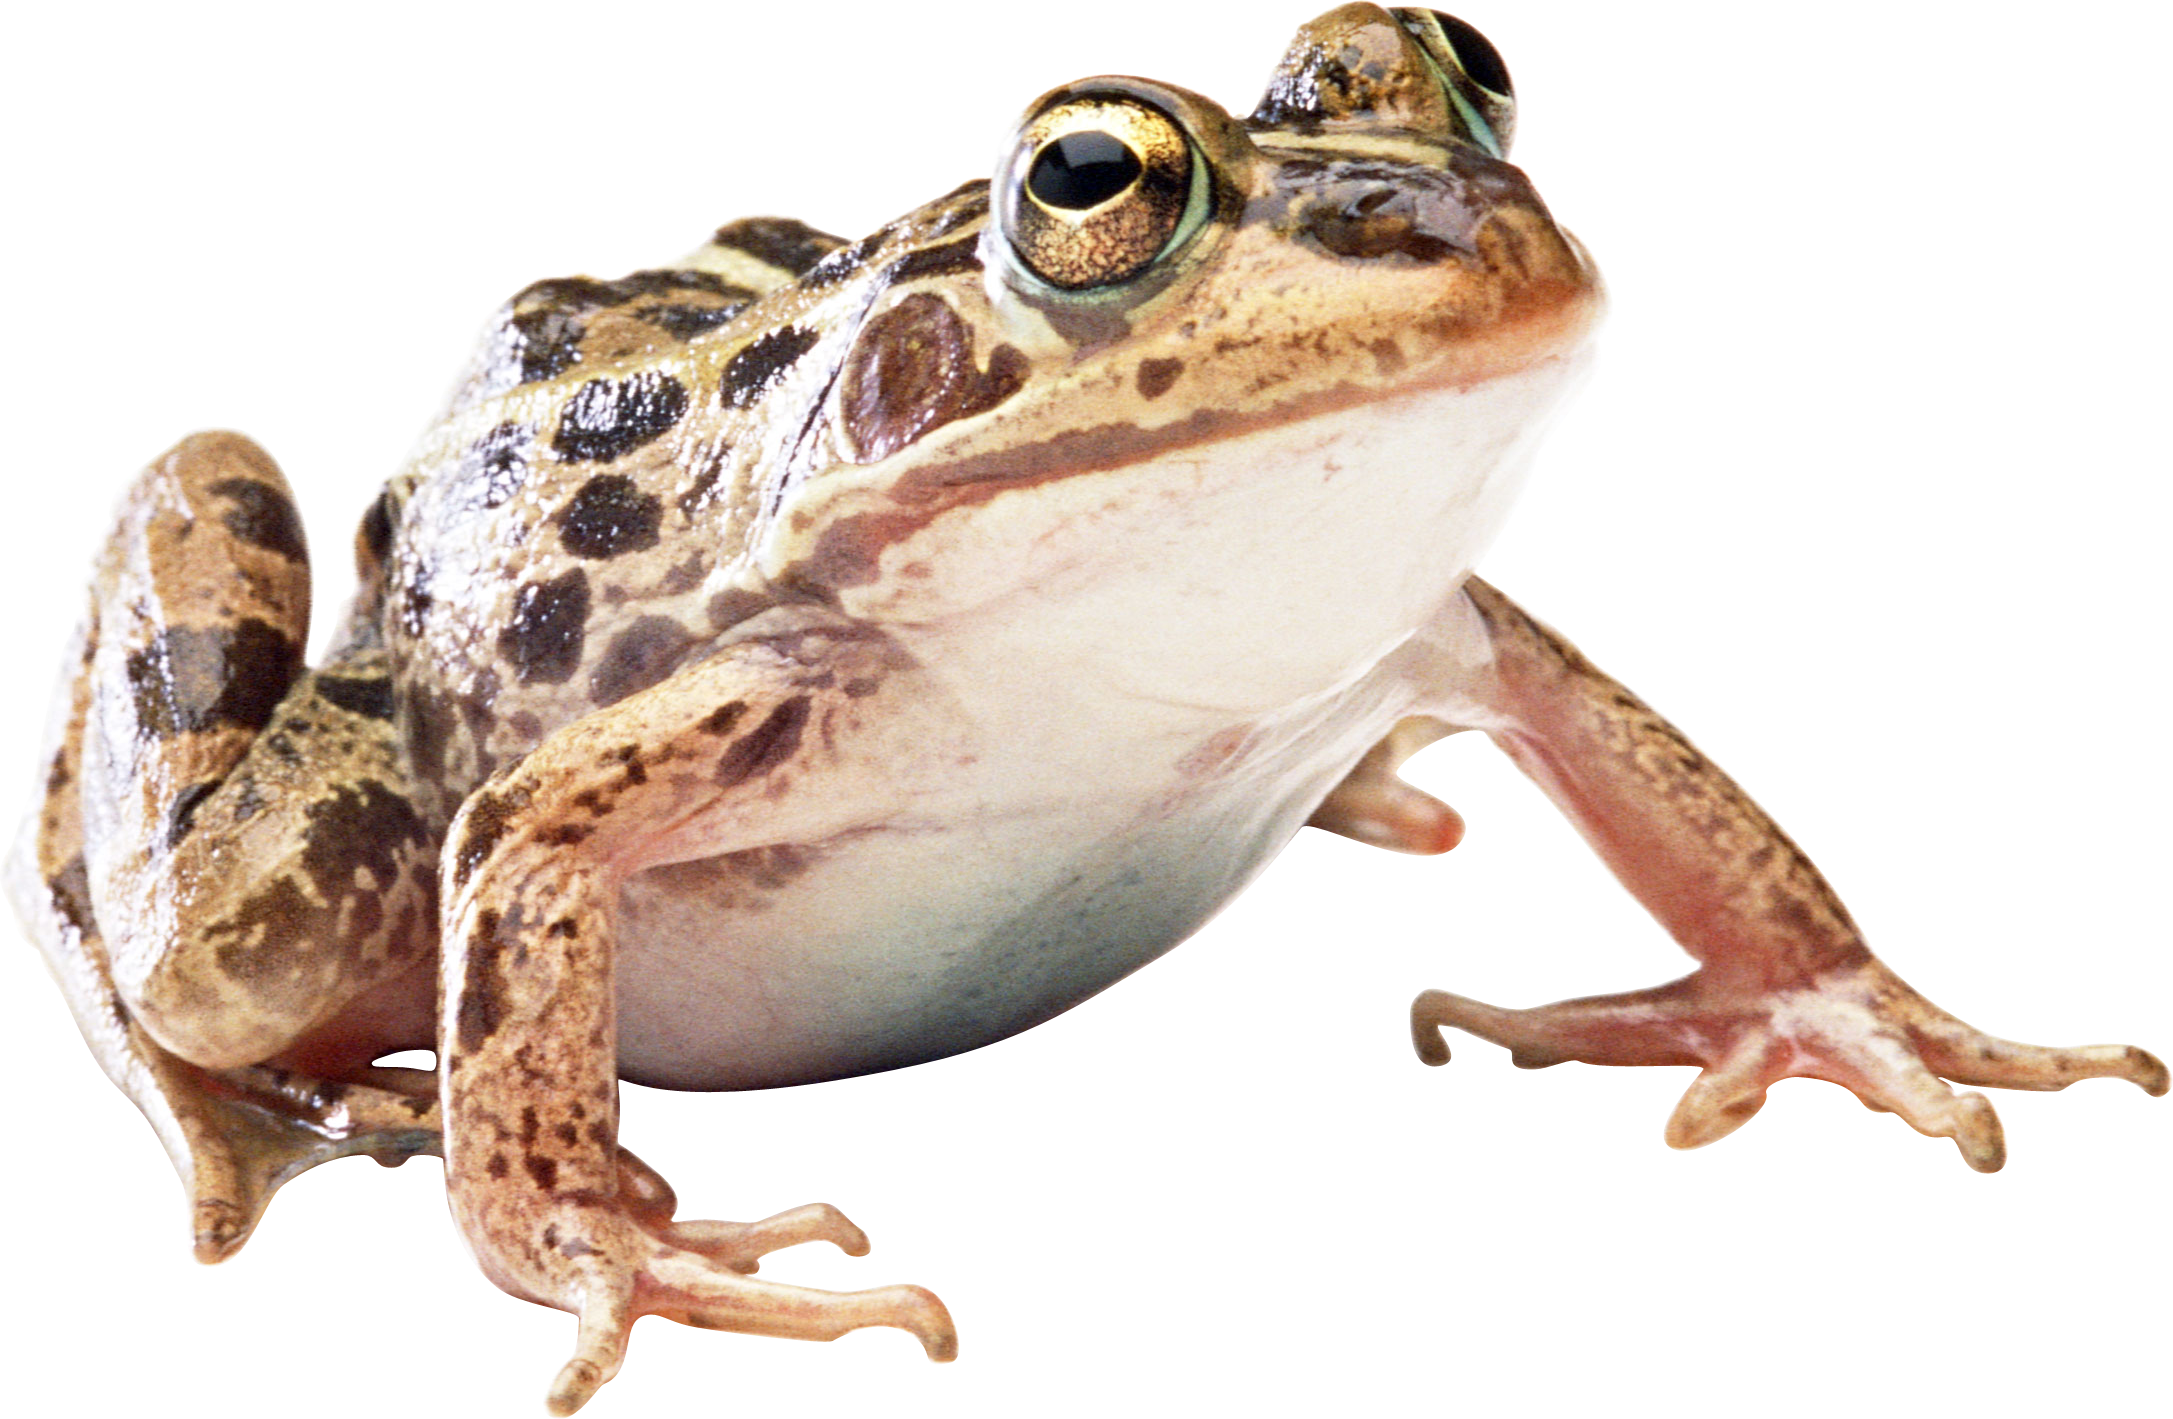 Frog PNG